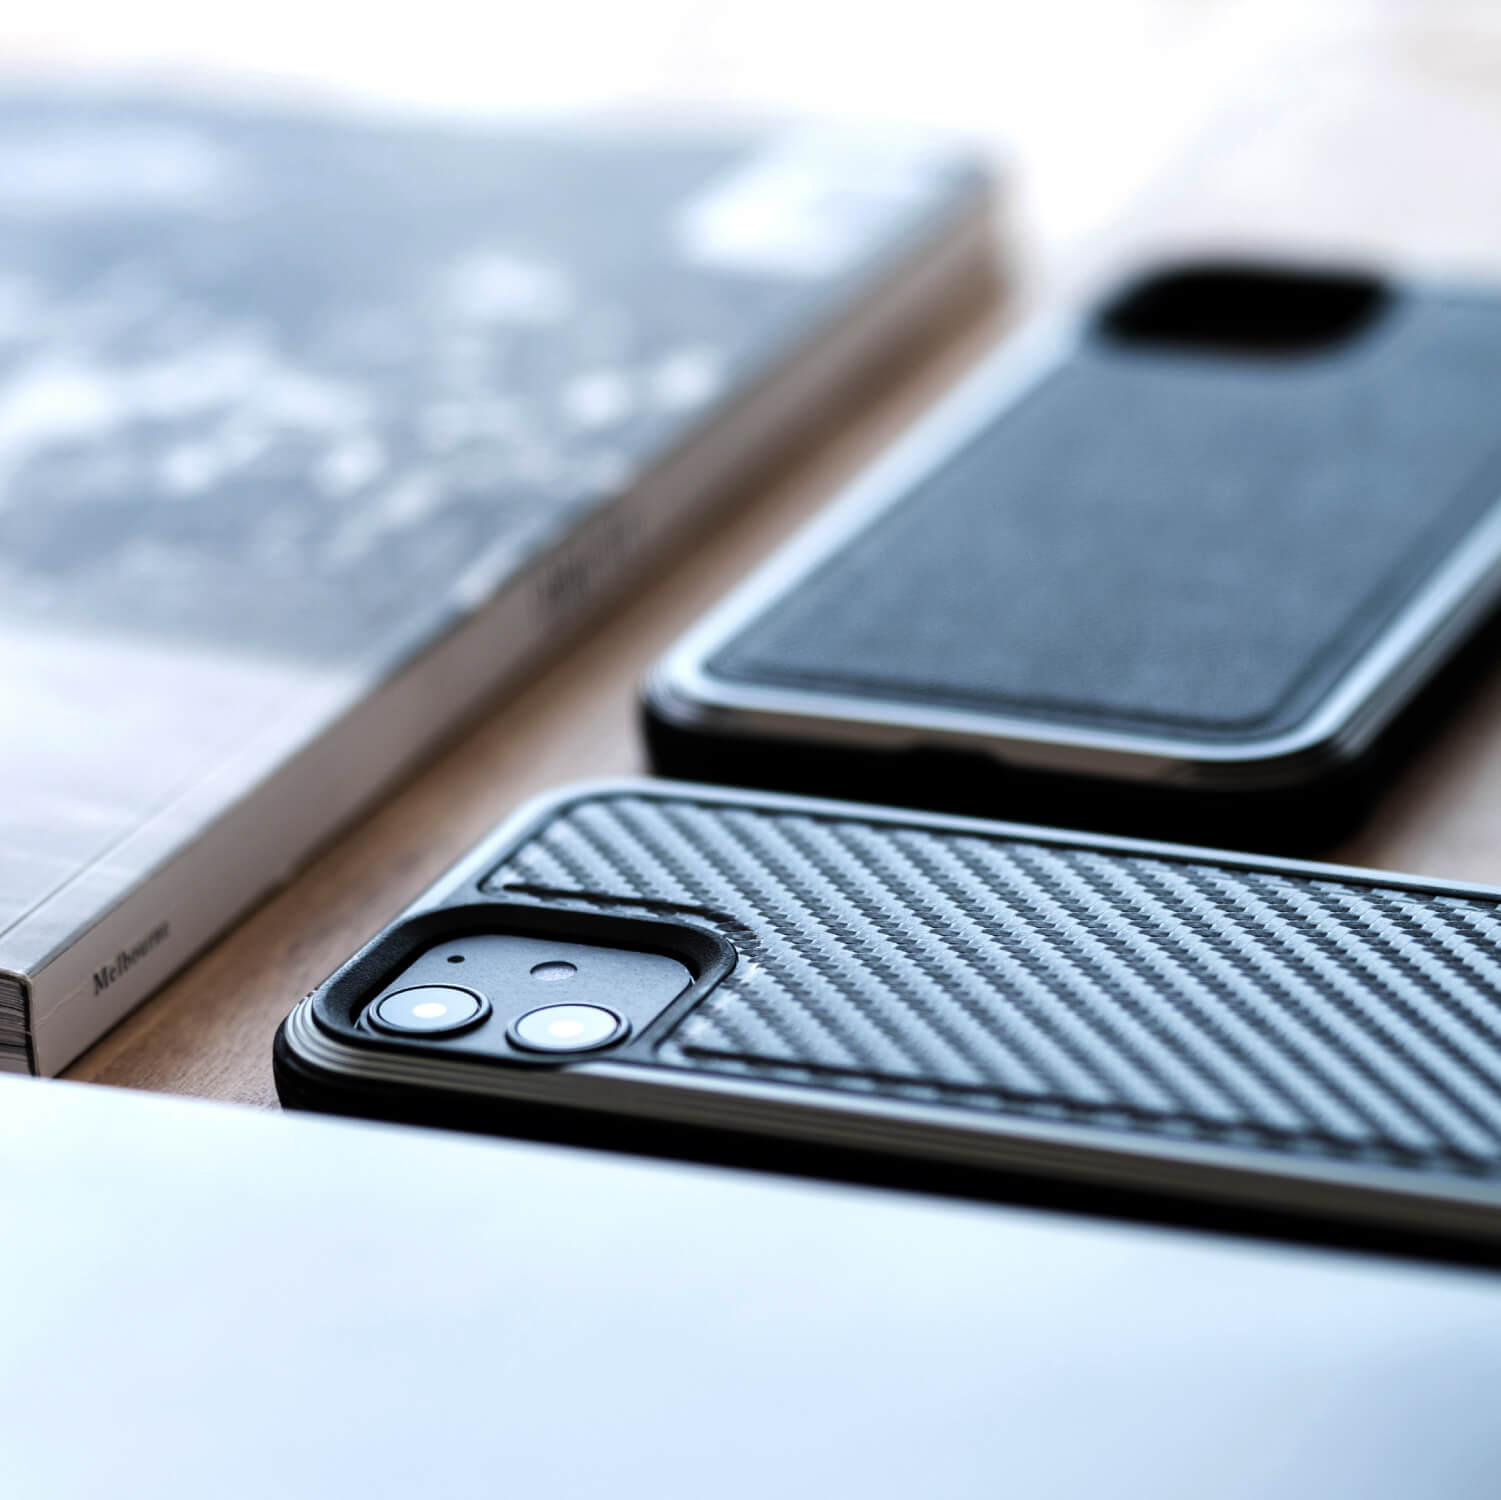 The Raptic Lux iPhone 12 Mini Case - LUX, known for its luxury design and reliable 3-metre drop protection, is placed on a table alongside a book.